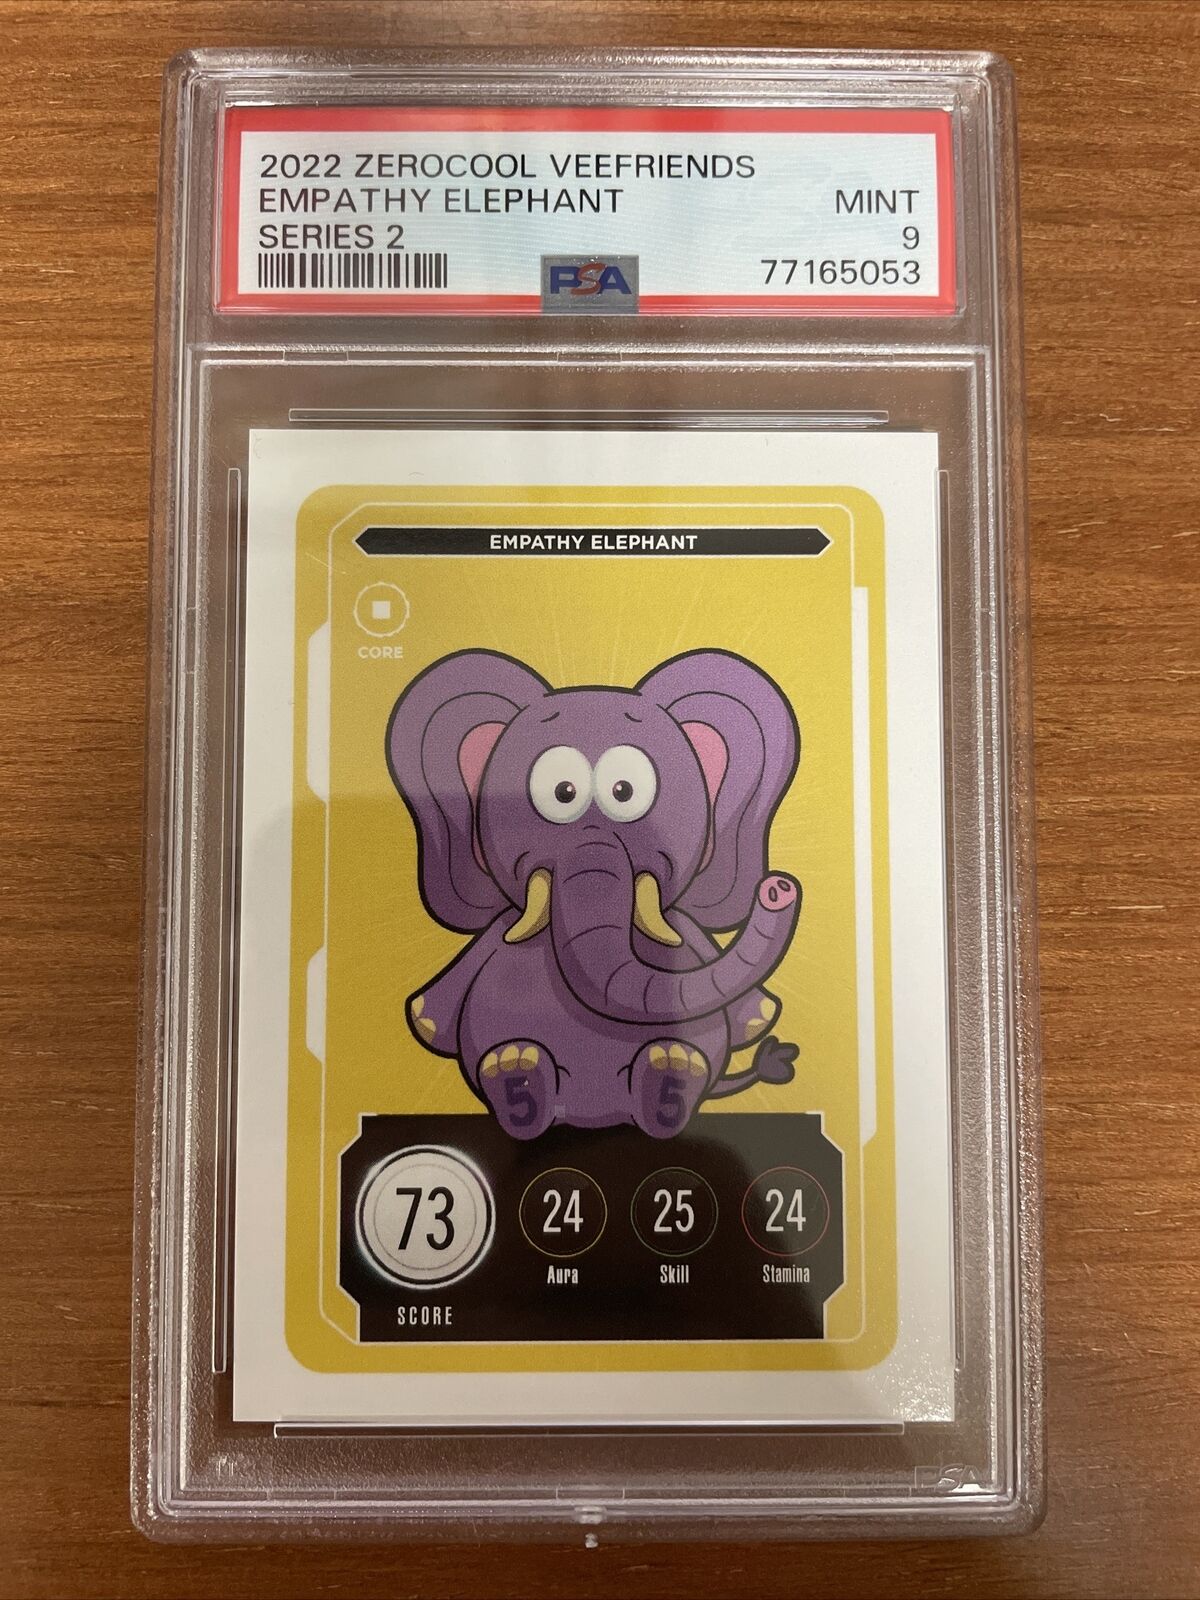 VeeFriends Compete And Collect Series 2 Empathy Elephant PSA 9 Mint